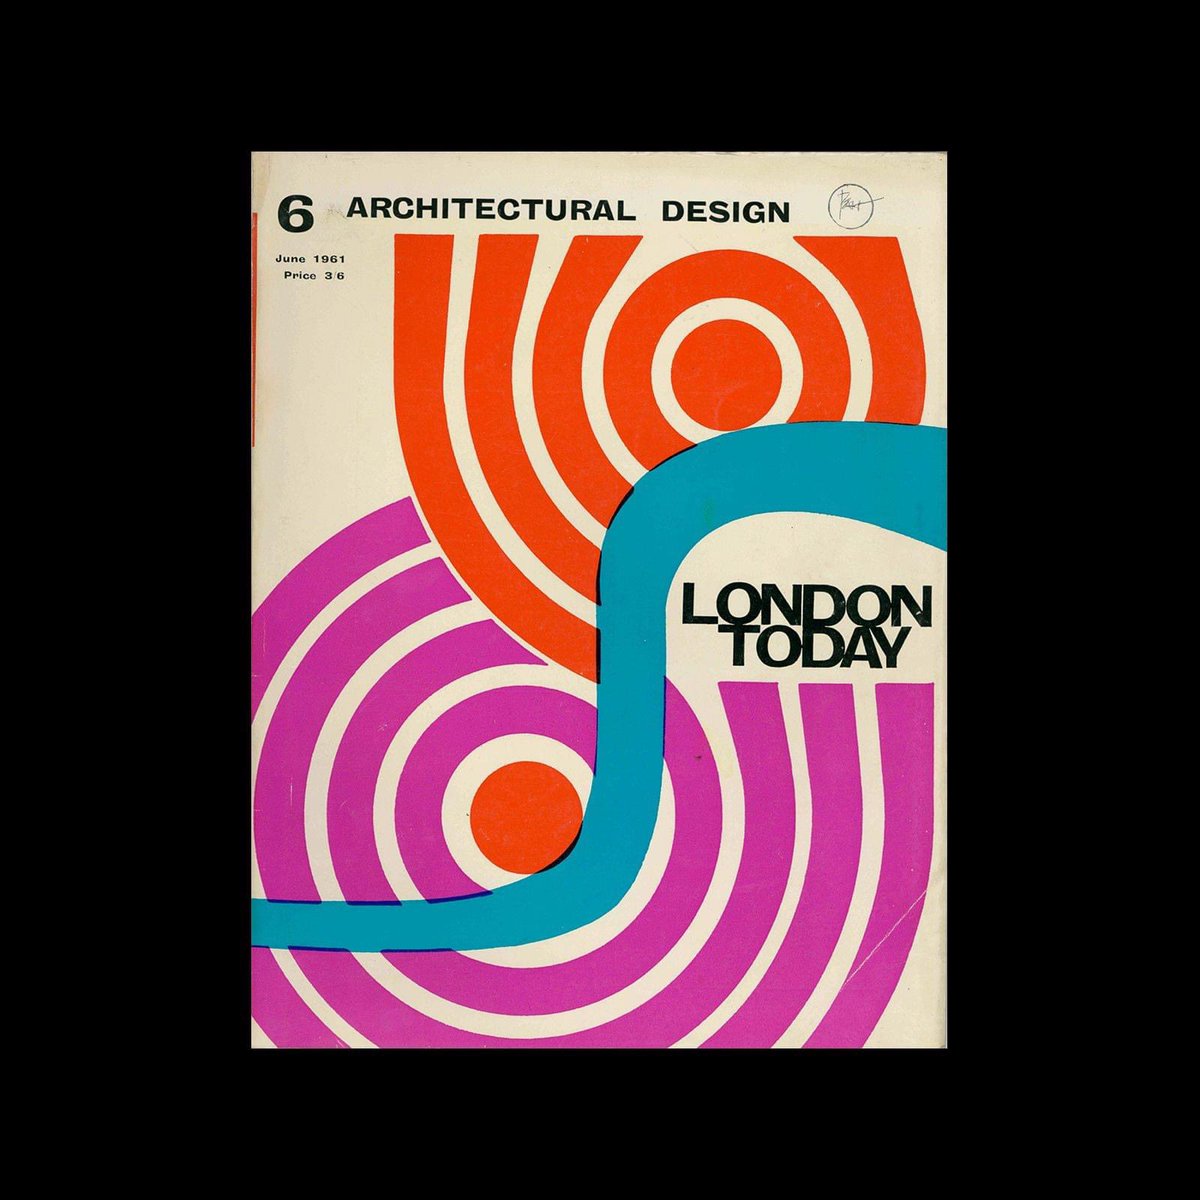 Architectural Design, June 1961
Cover design by Theo Crosby on the theme of the two cities of London and Westminster
designreviewed.com/artefacts/arch…
#theocrosby #architecturaldesign  #london